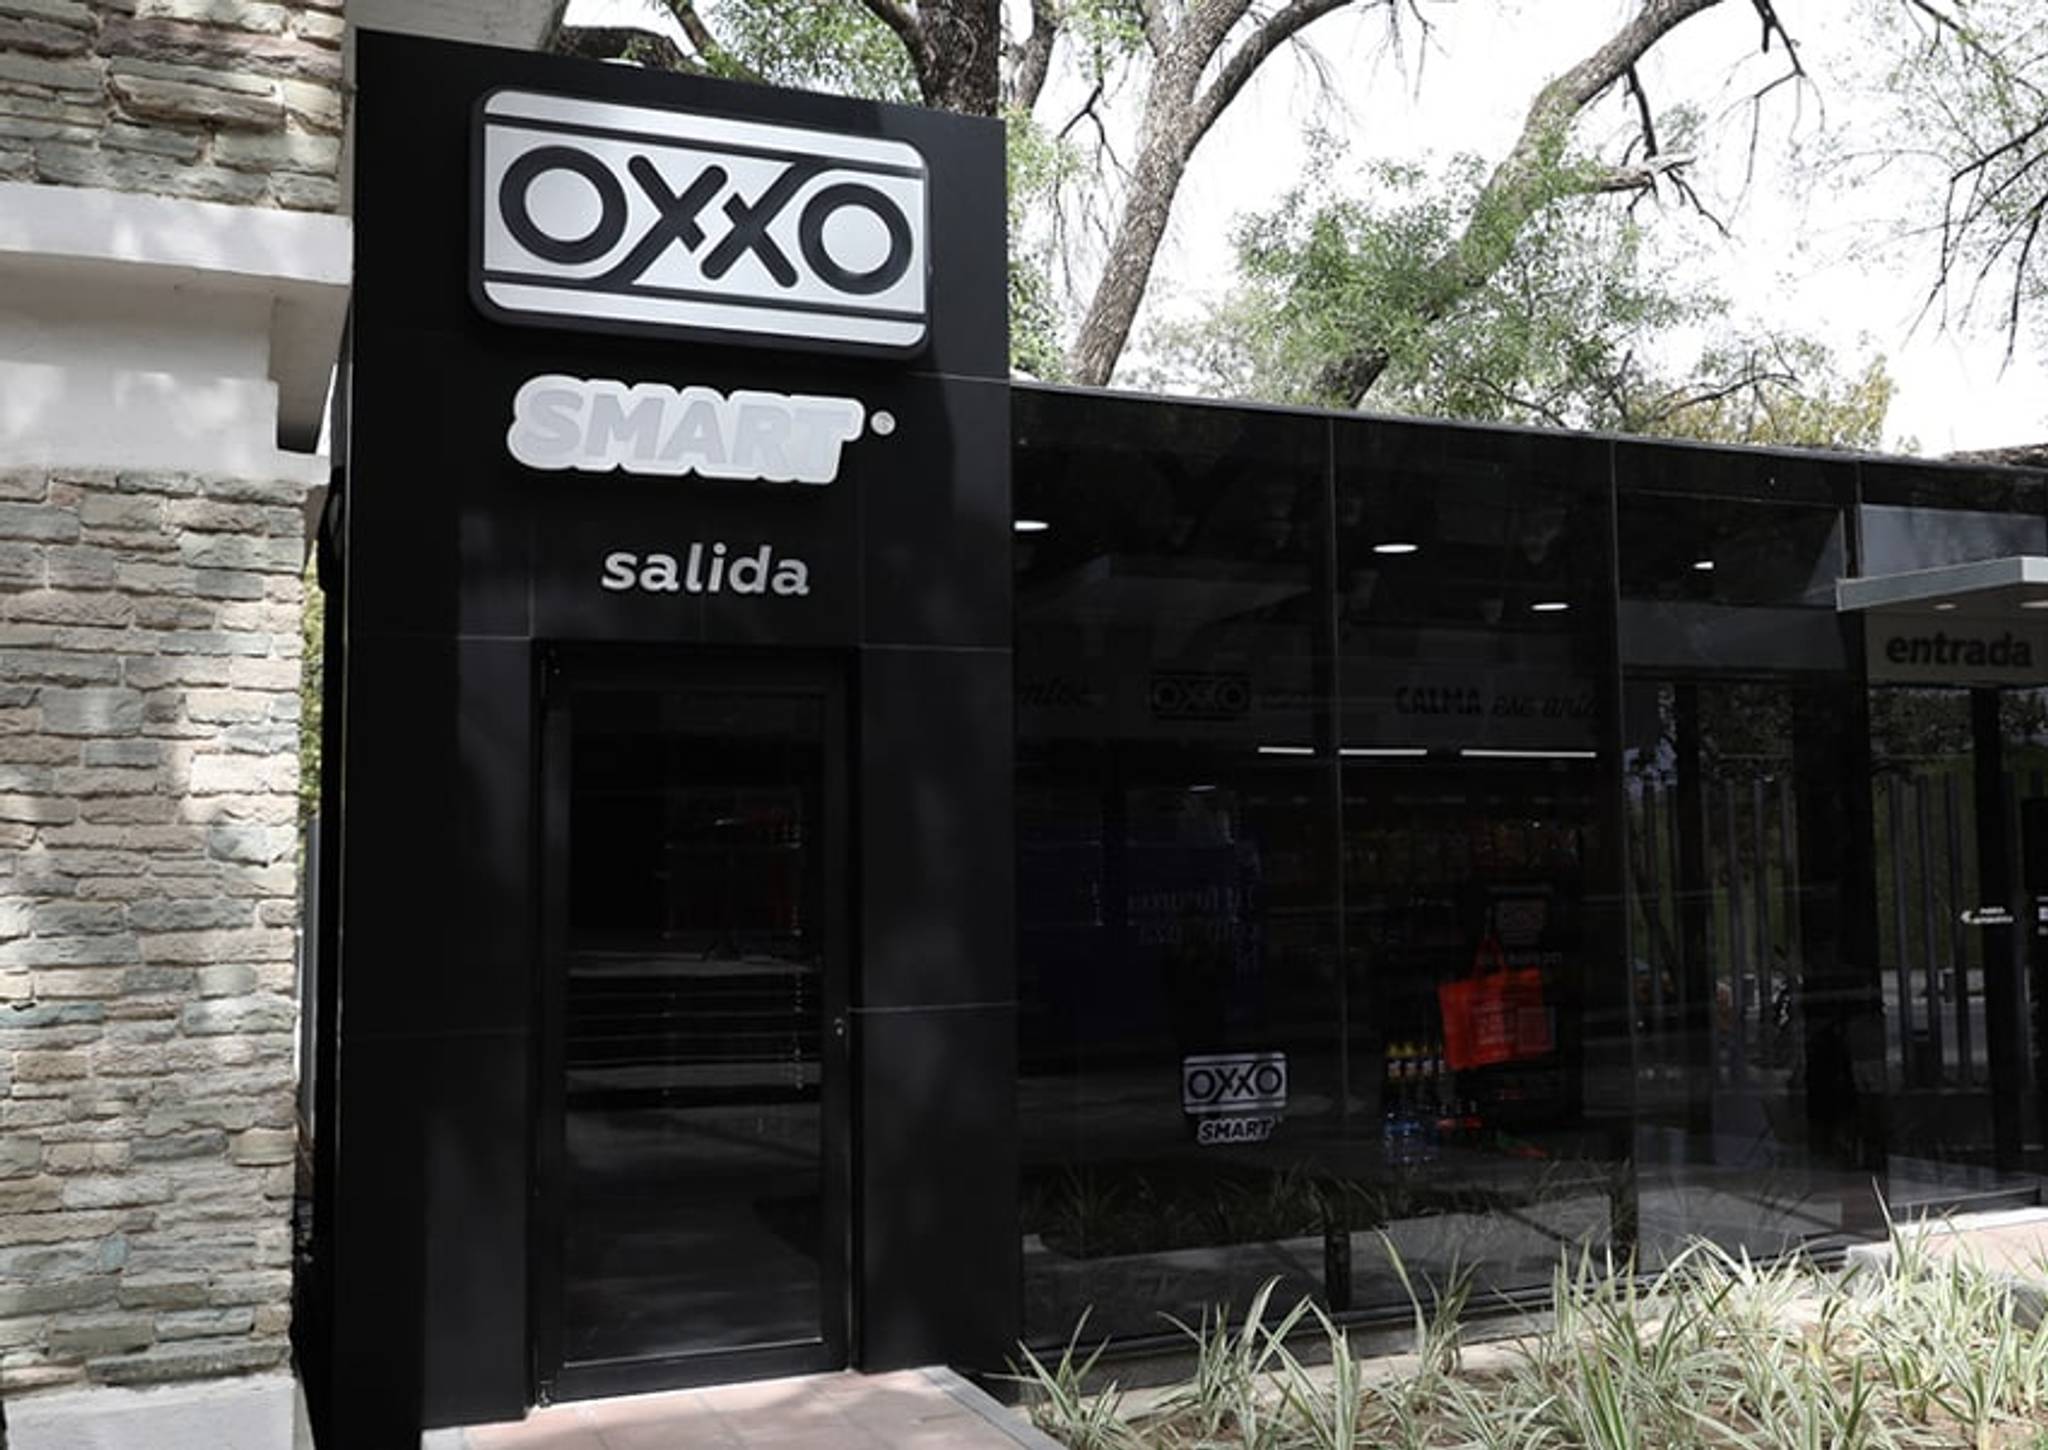 Oxxo smart store brings frictionless shopping to Mexico